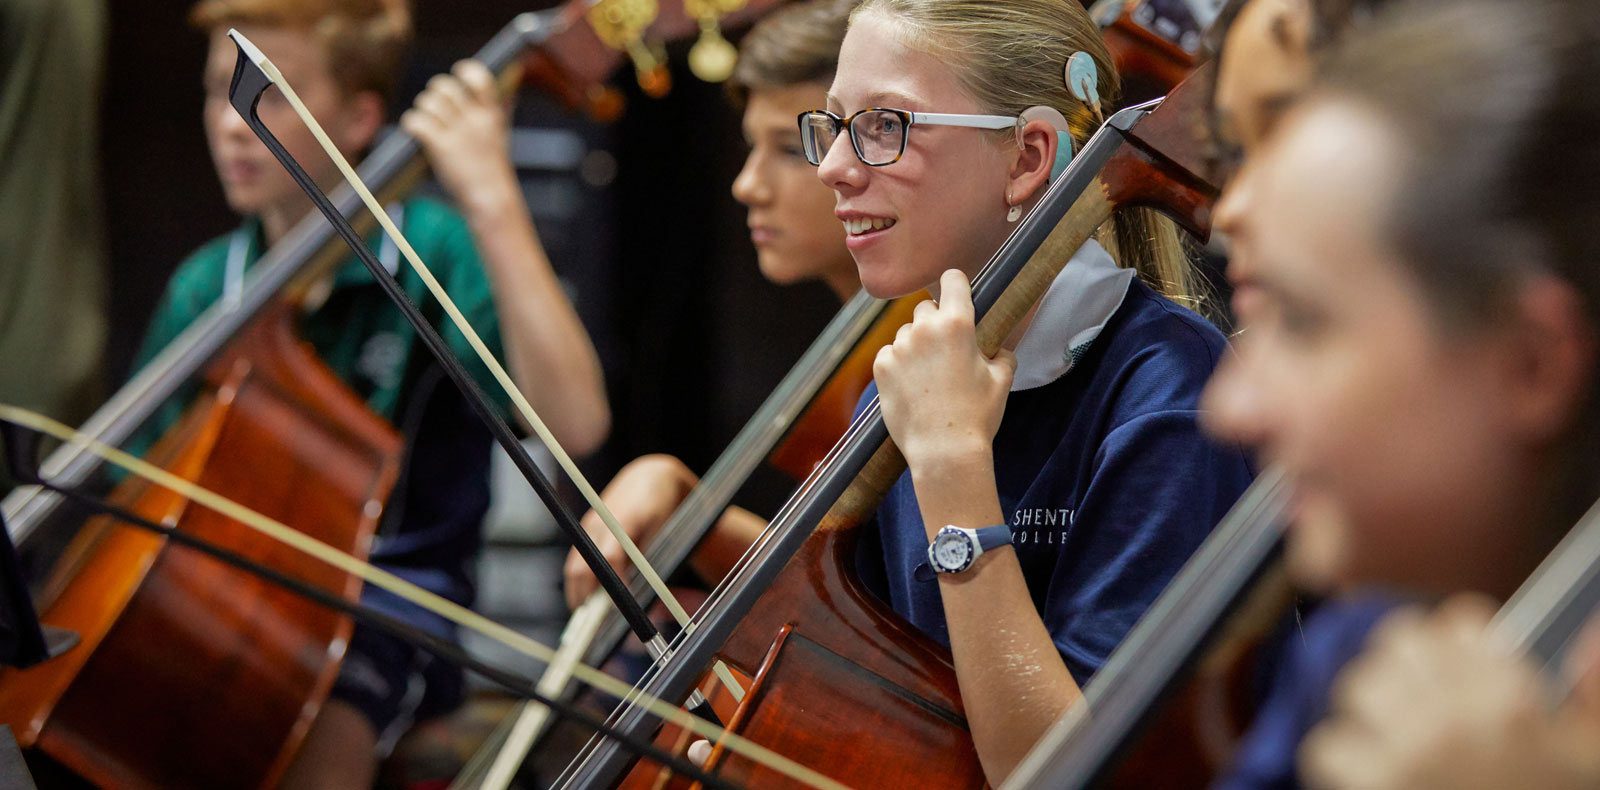 Female and male students playing cello in school orchestra